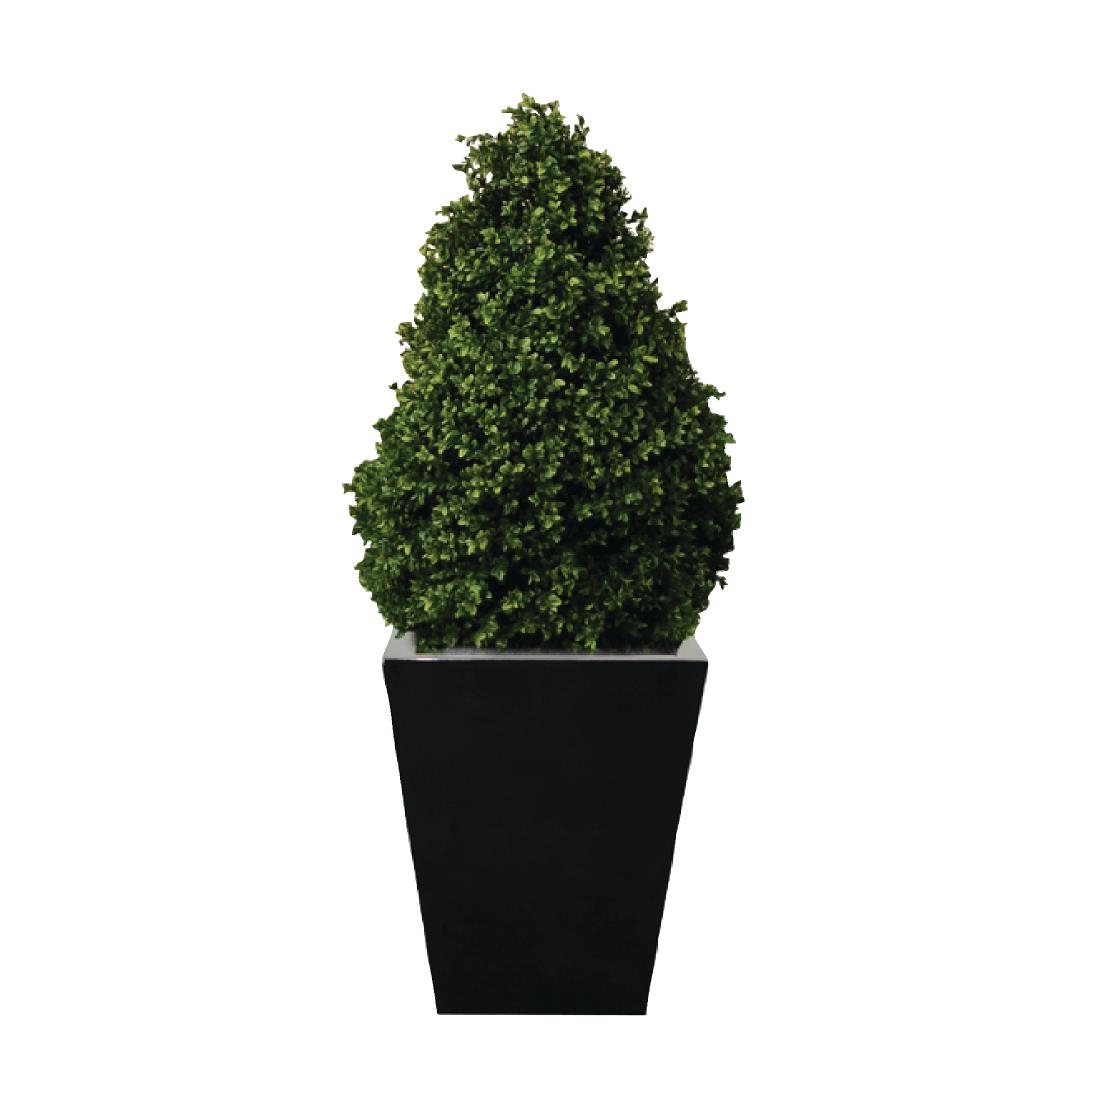 Artificial Topiary Buxus Pyramid 900mm (CD159)